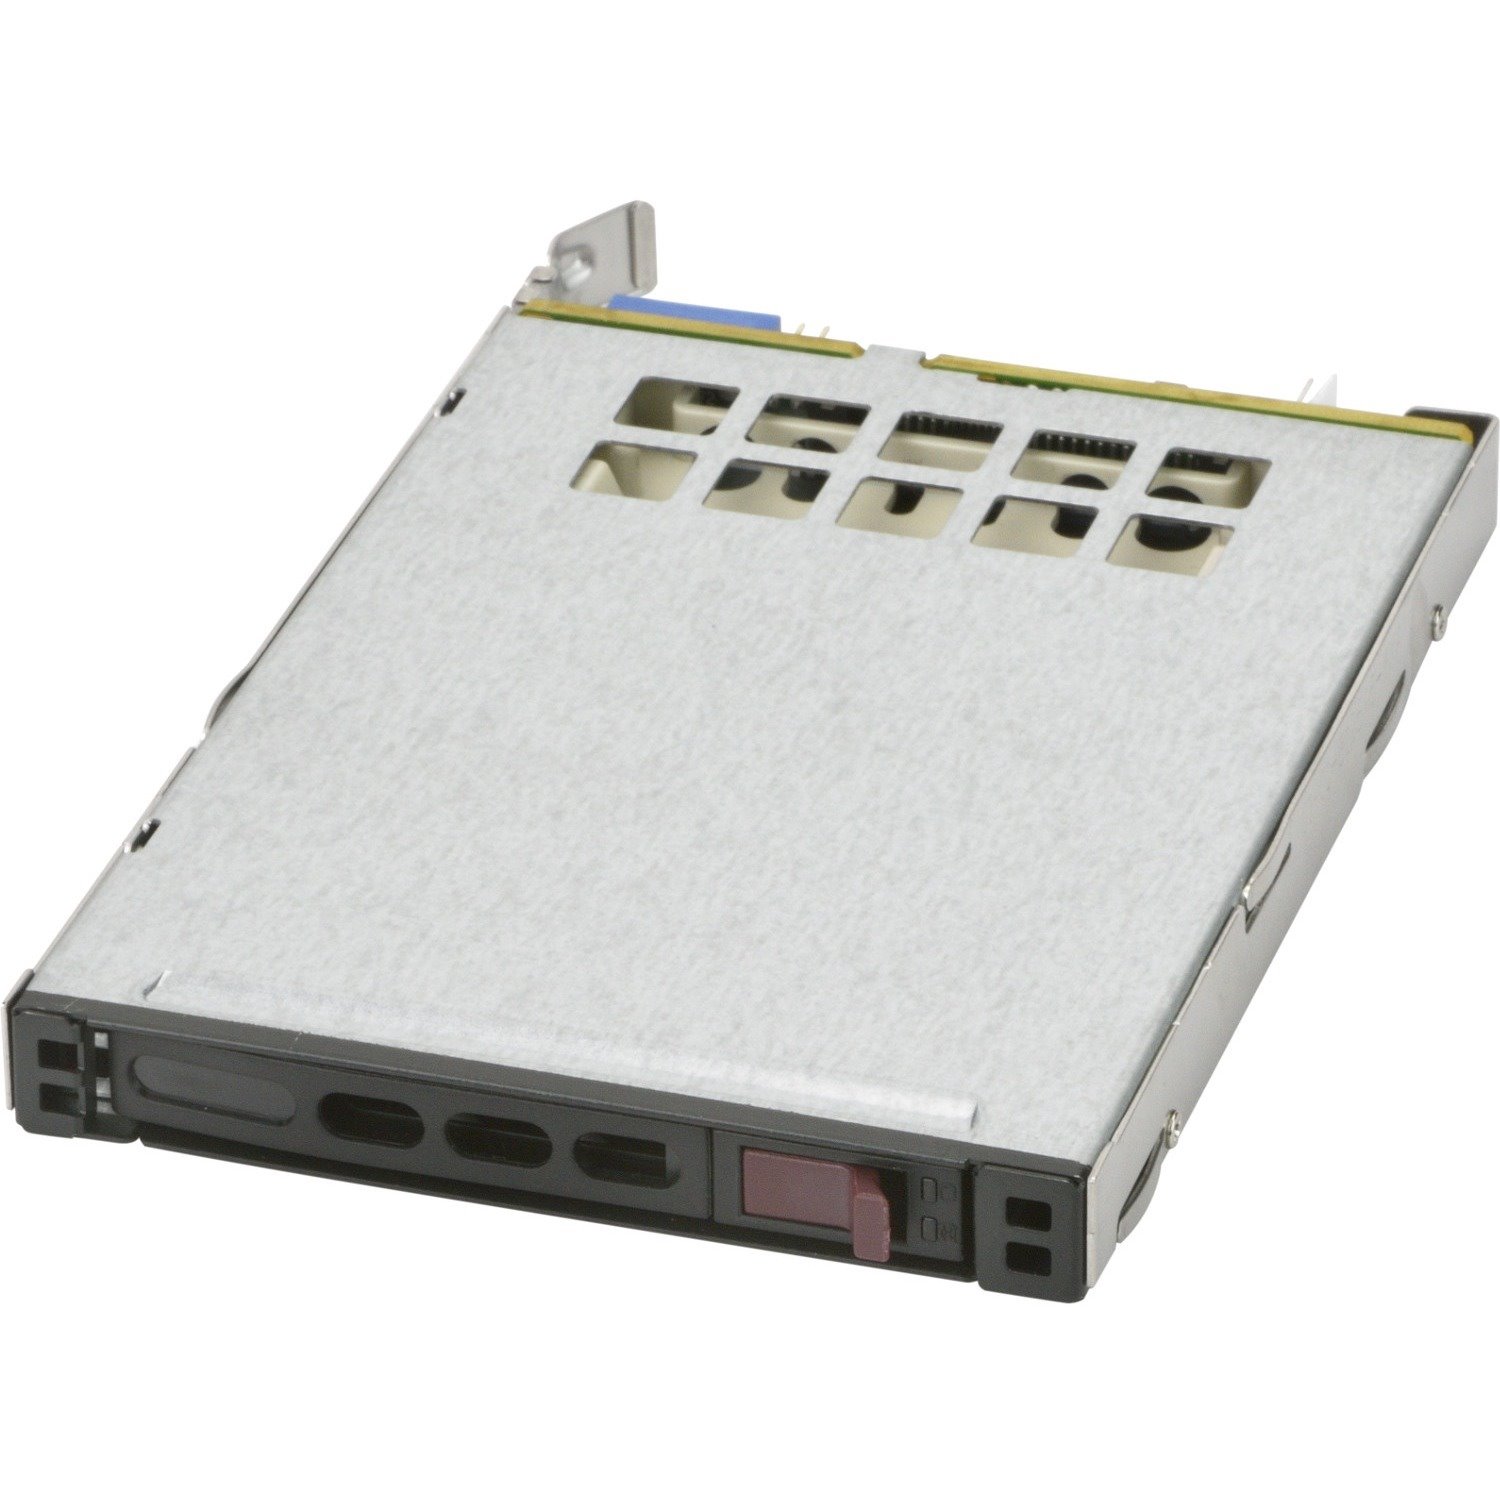 Supermicro Drive Bay Adapter for 2.5" Internal